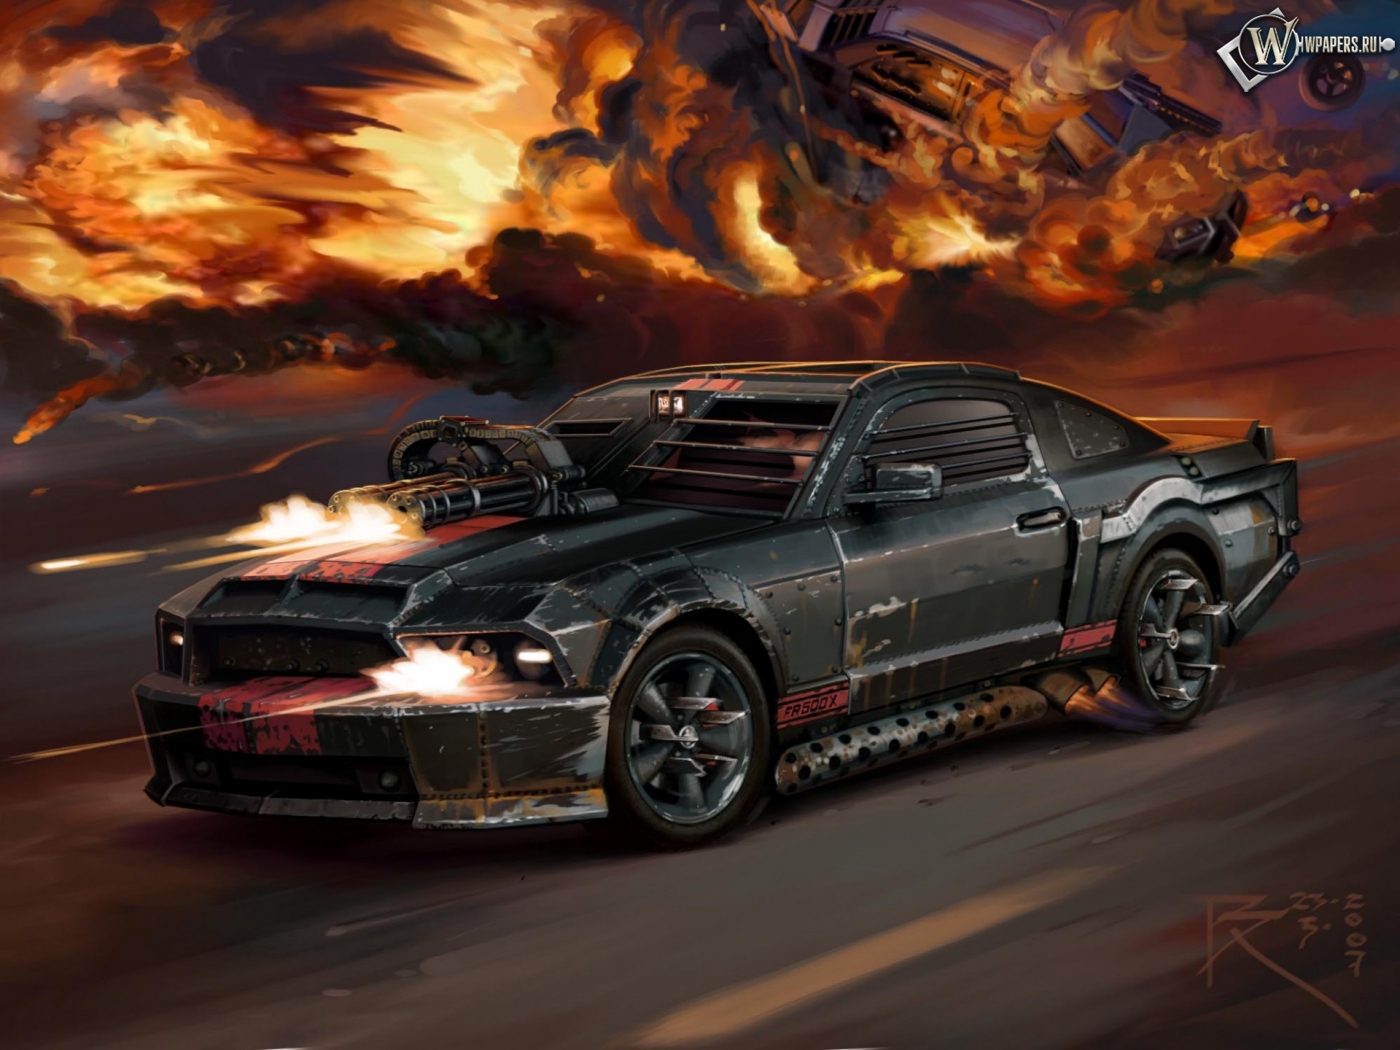 Car ford mustang death race 1400x1050